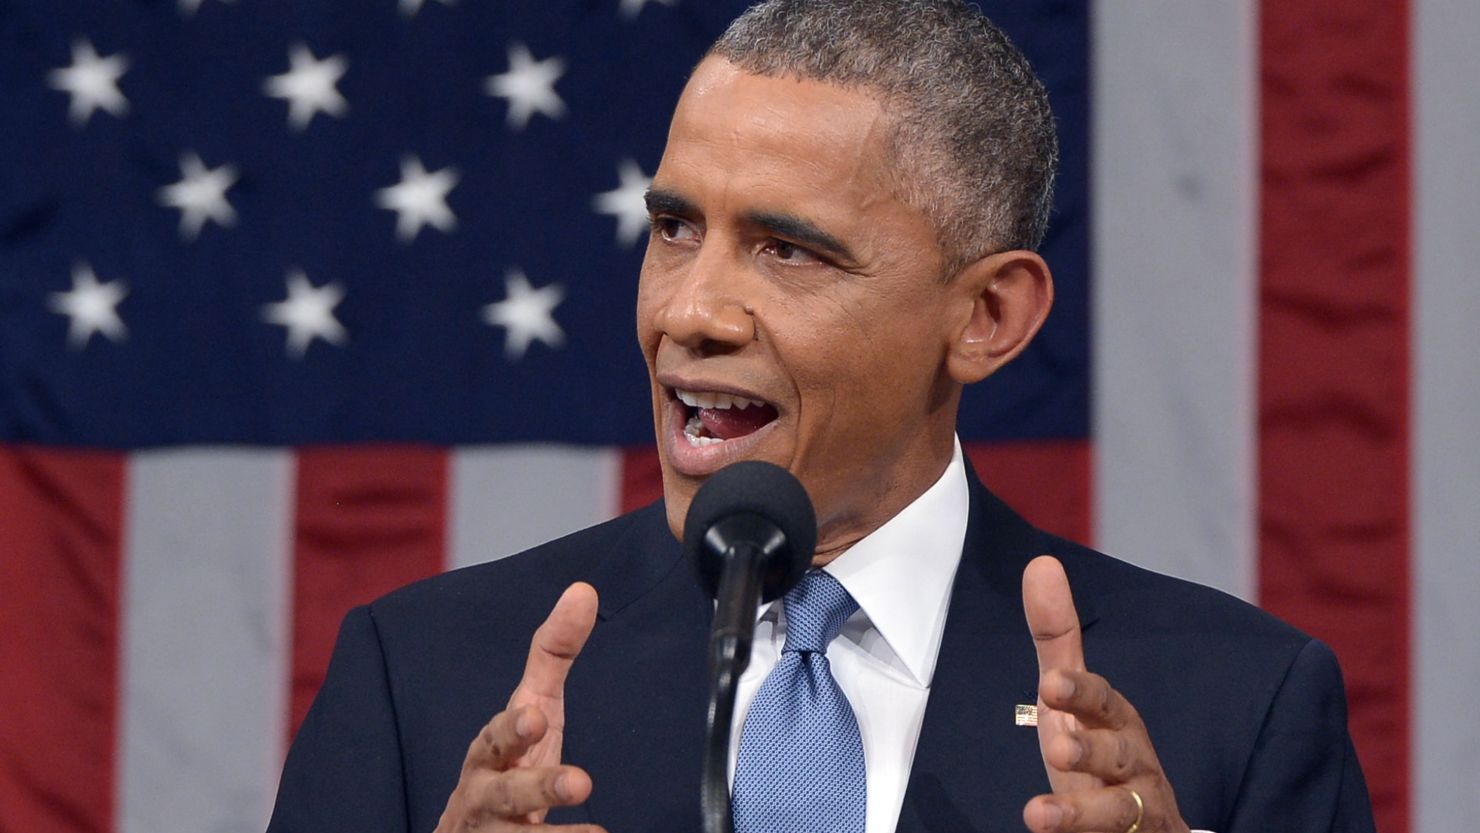 Obama is launching a new effort to dial back spending cuts